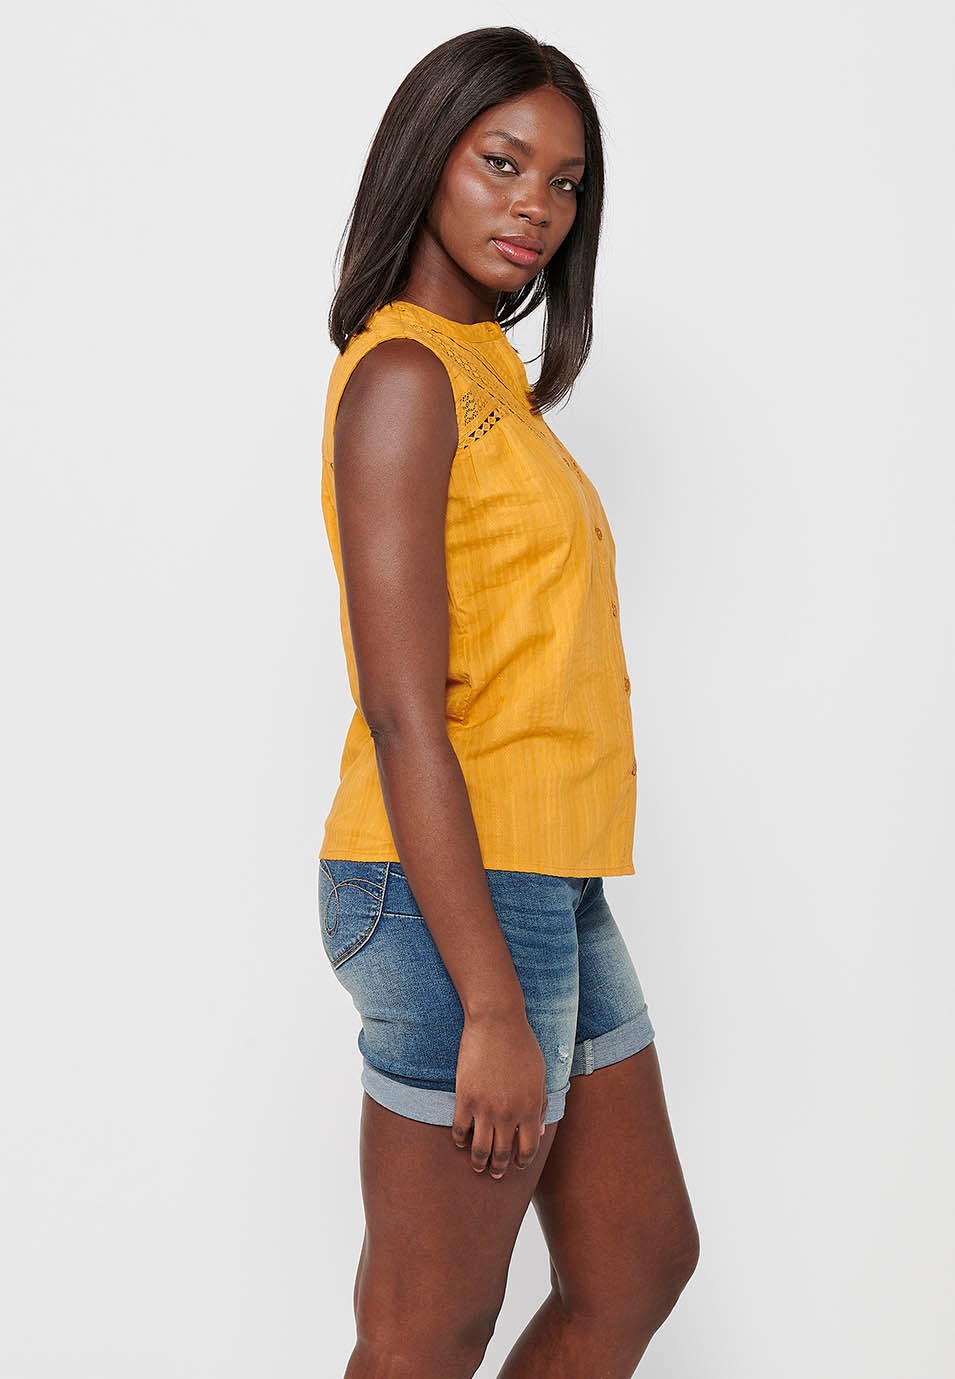 Sleeveless Cotton Blouse with Round Neck and Front Closure with Buttons and Embroidered Details in Mustard Color for Women 8